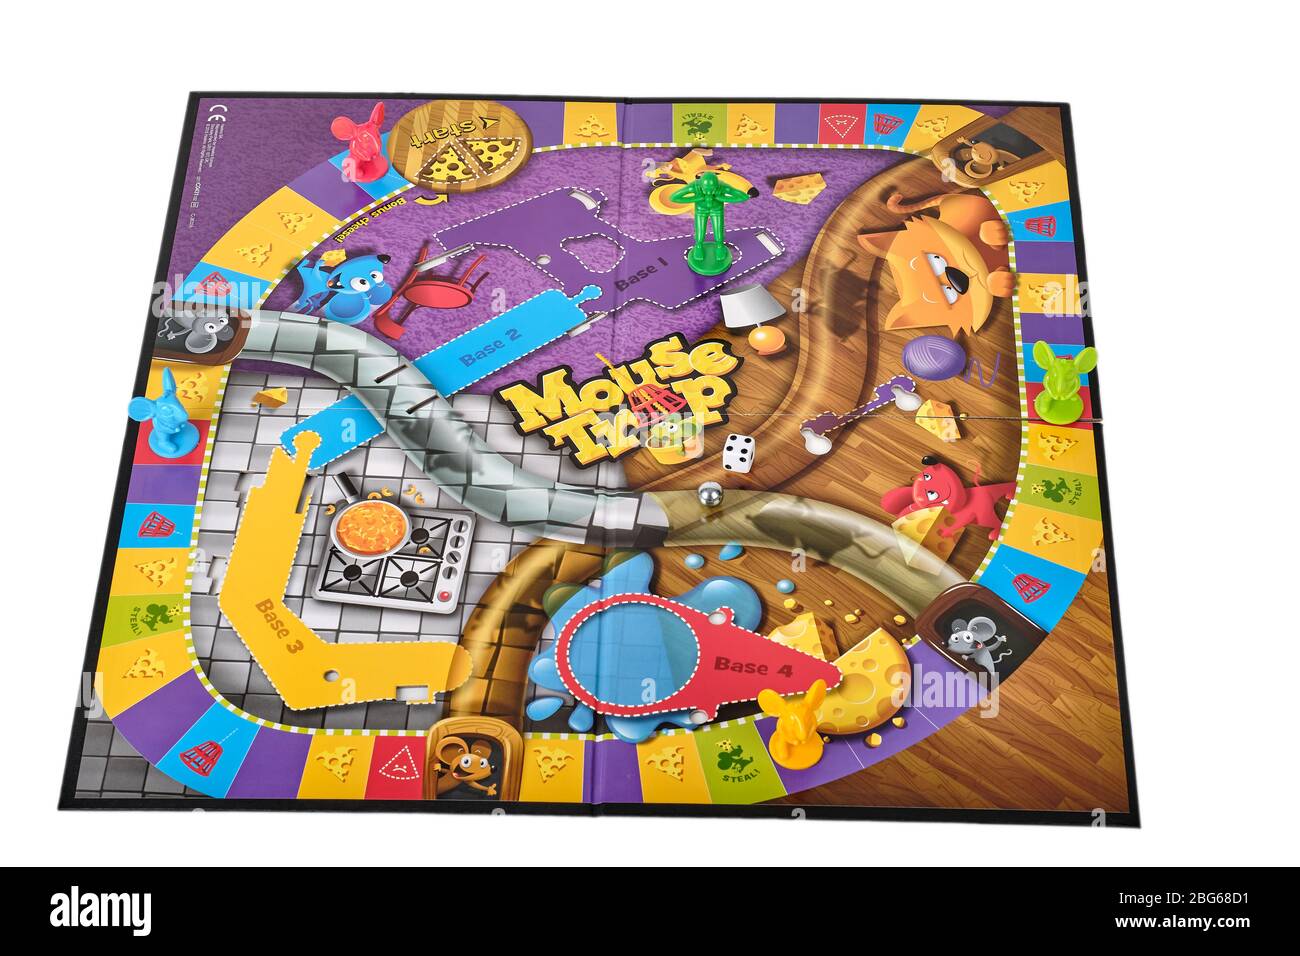 https://c8.alamy.com/comp/2BG68D1/close-up-of-hasbro-mouse-trap-board-game-pieces-ready-to-be-assembled-onto-the-board-2BG68D1.jpg